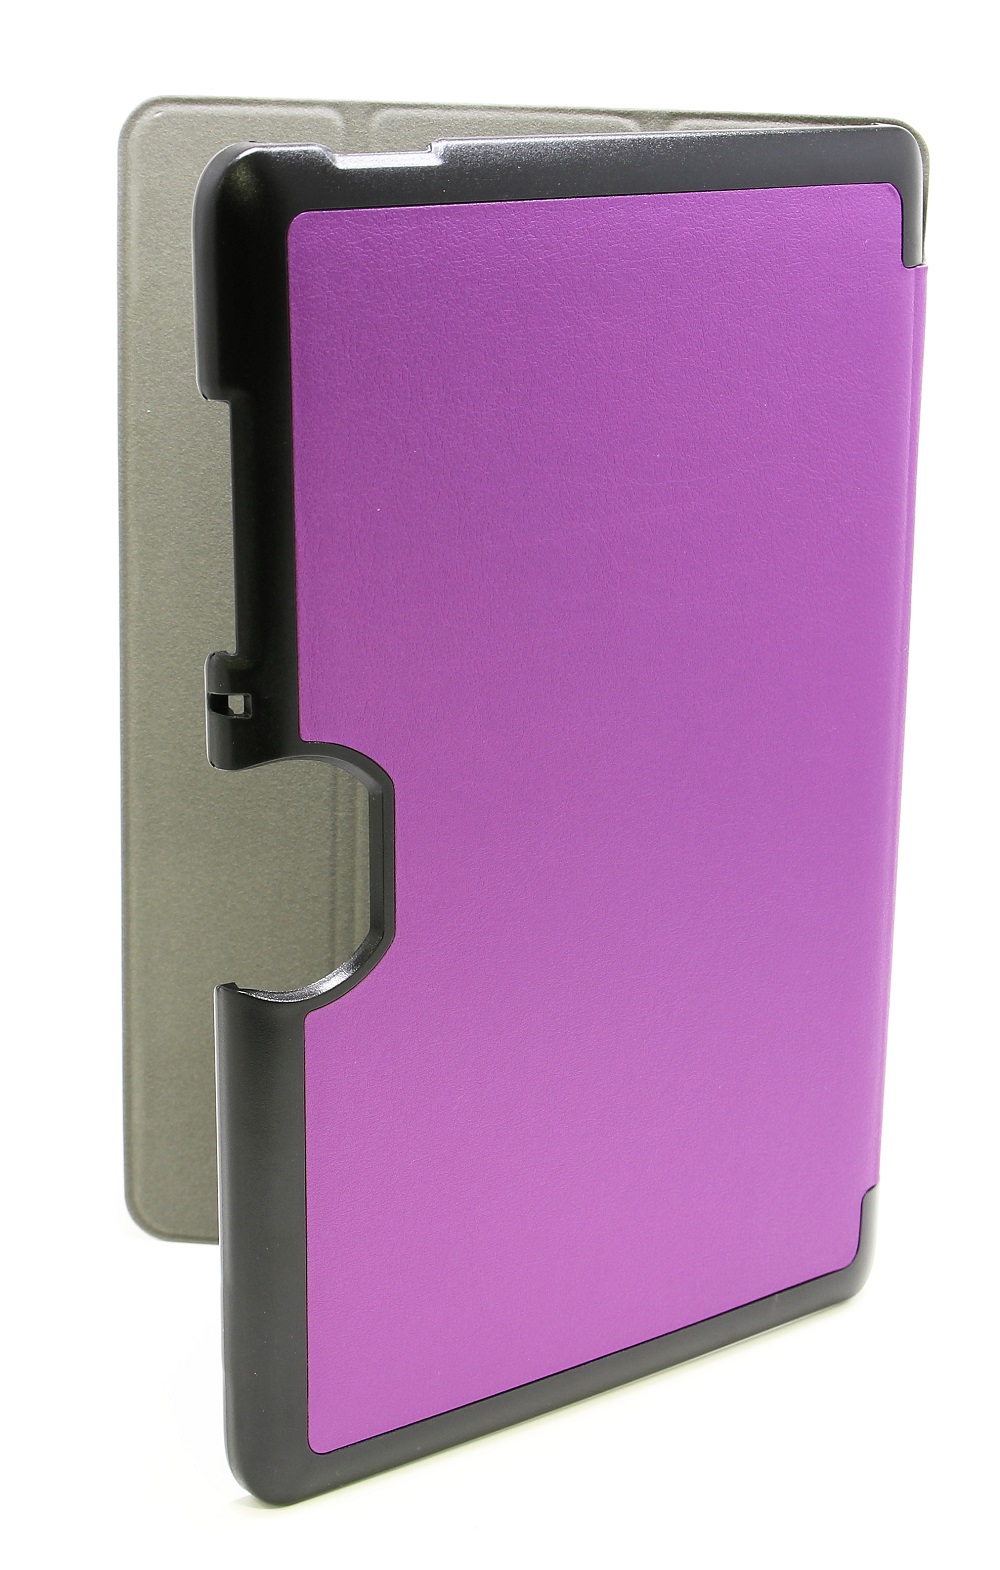 billigamobilskydd.seCover Case Acer Iconia One B3-A30